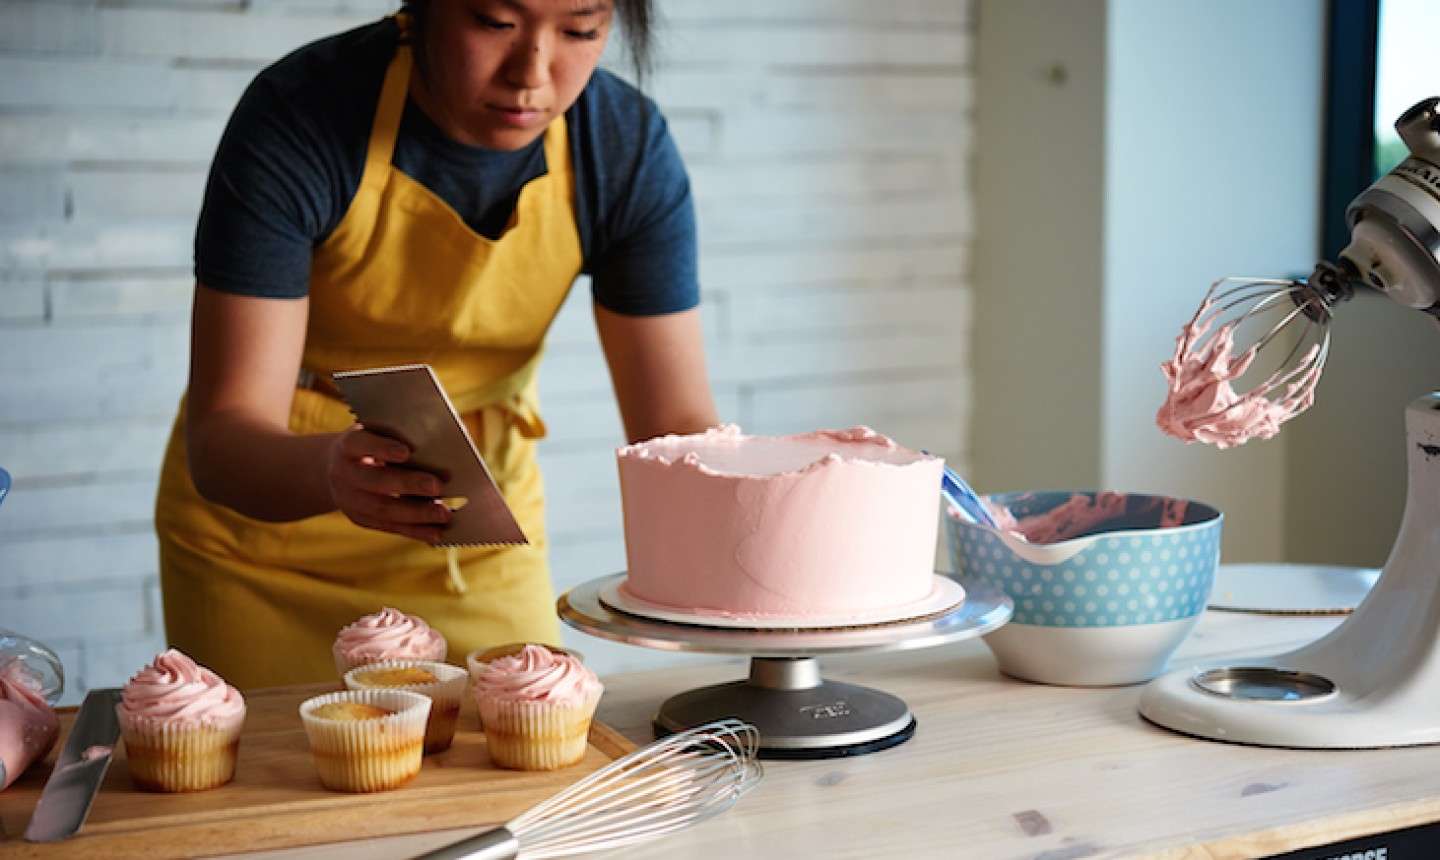 Is The Digital Platform Is The Safer Way Of Ordering Cakes?